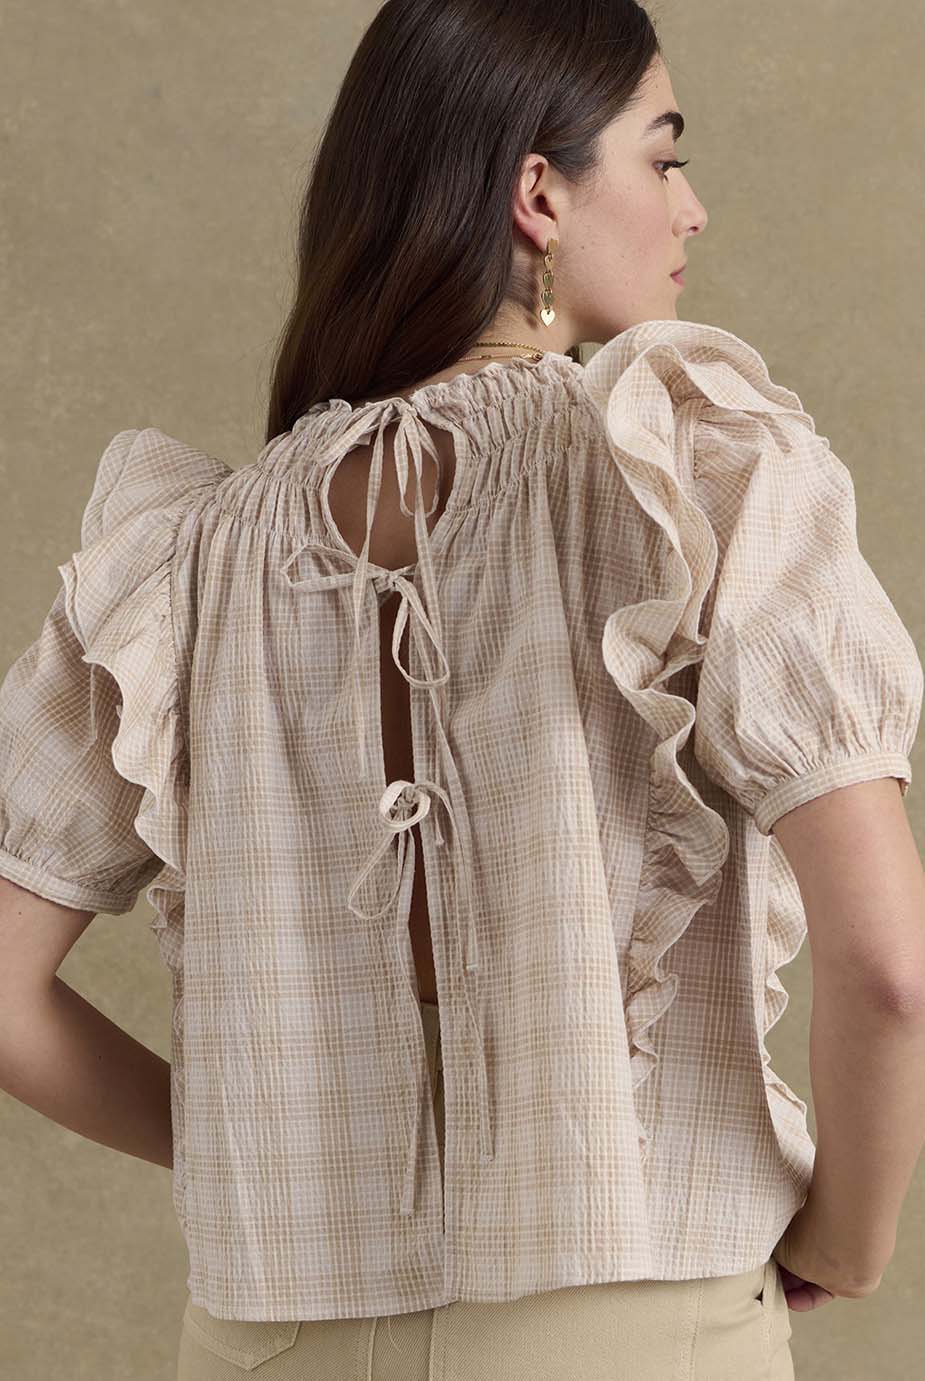 Amia beige and white check blouse